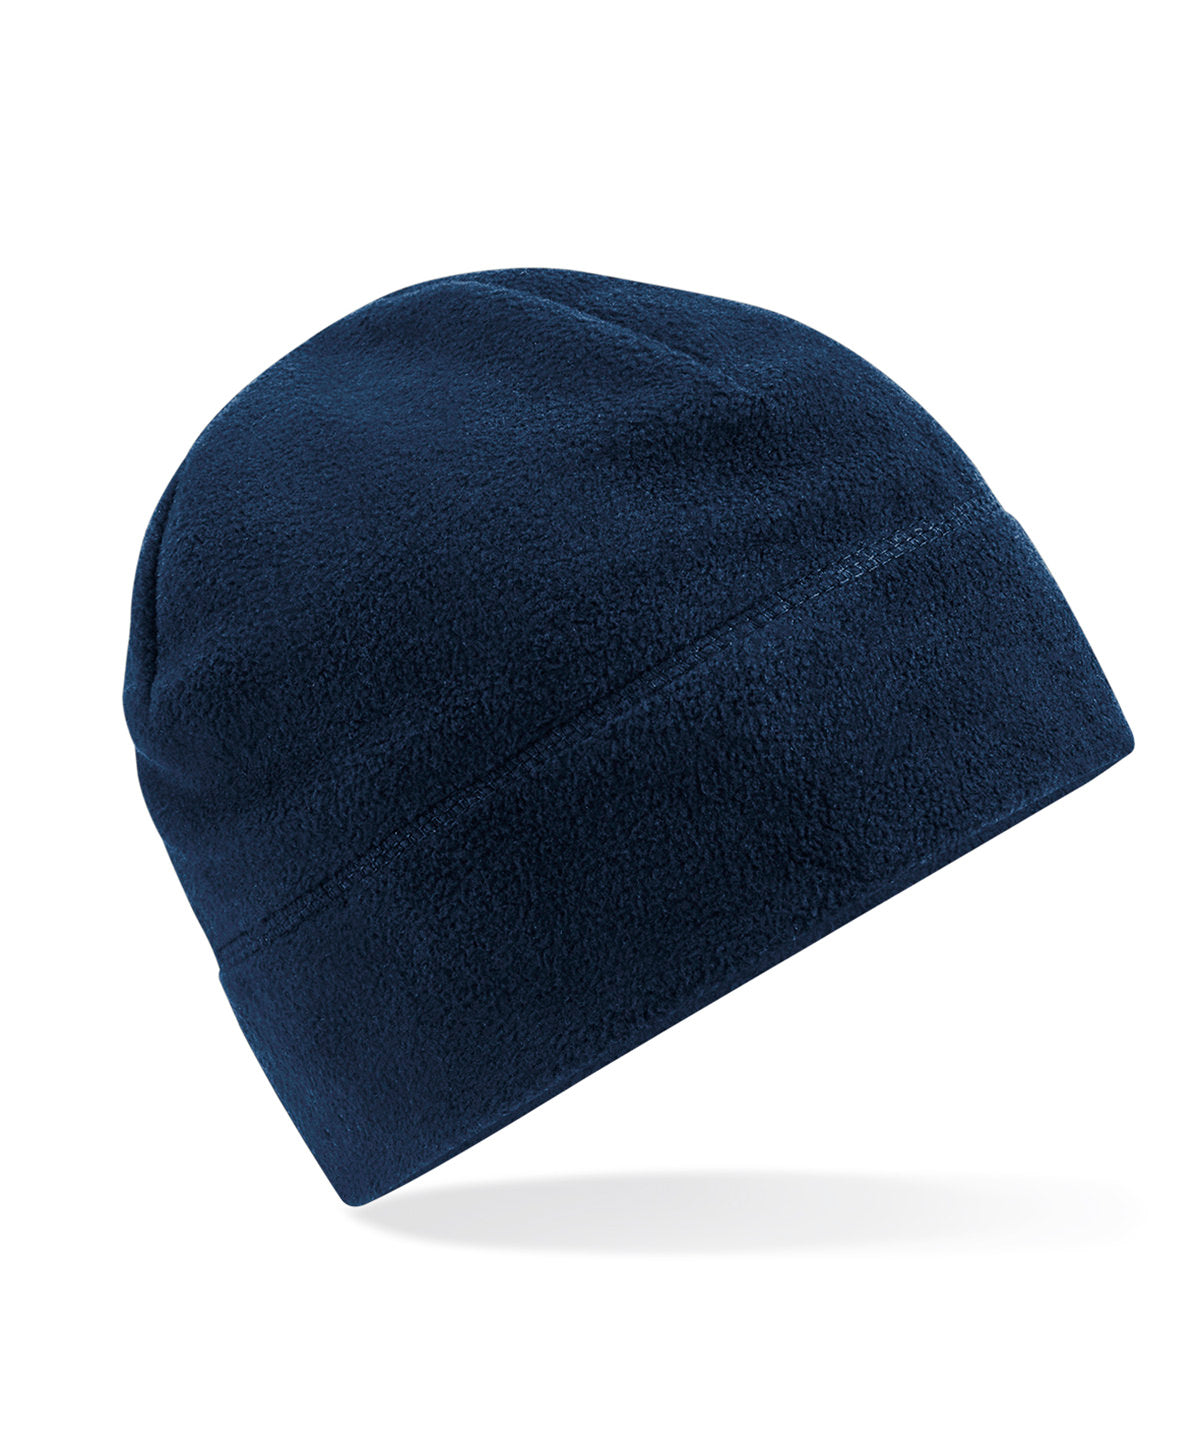 Personalised Hats - Navy Beechfield Recycled fleece pull-on beanie